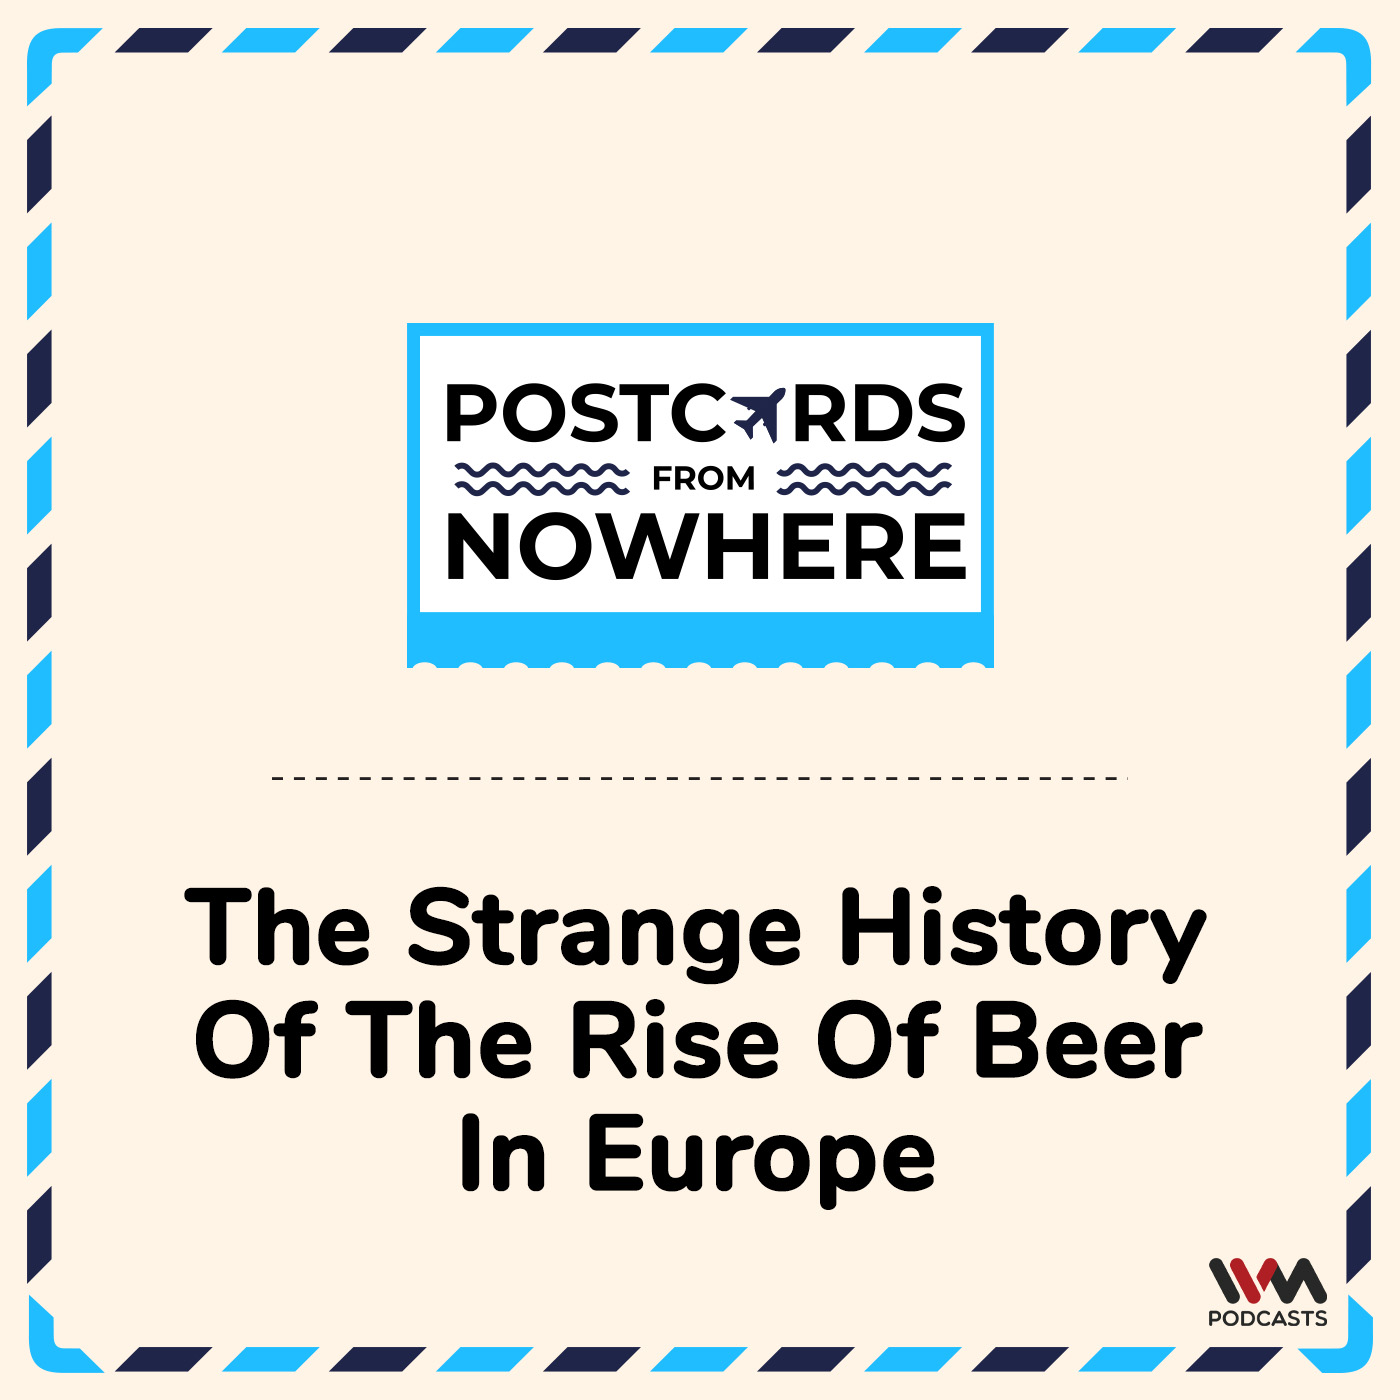 The Strange History of the rise of Beer in Europe